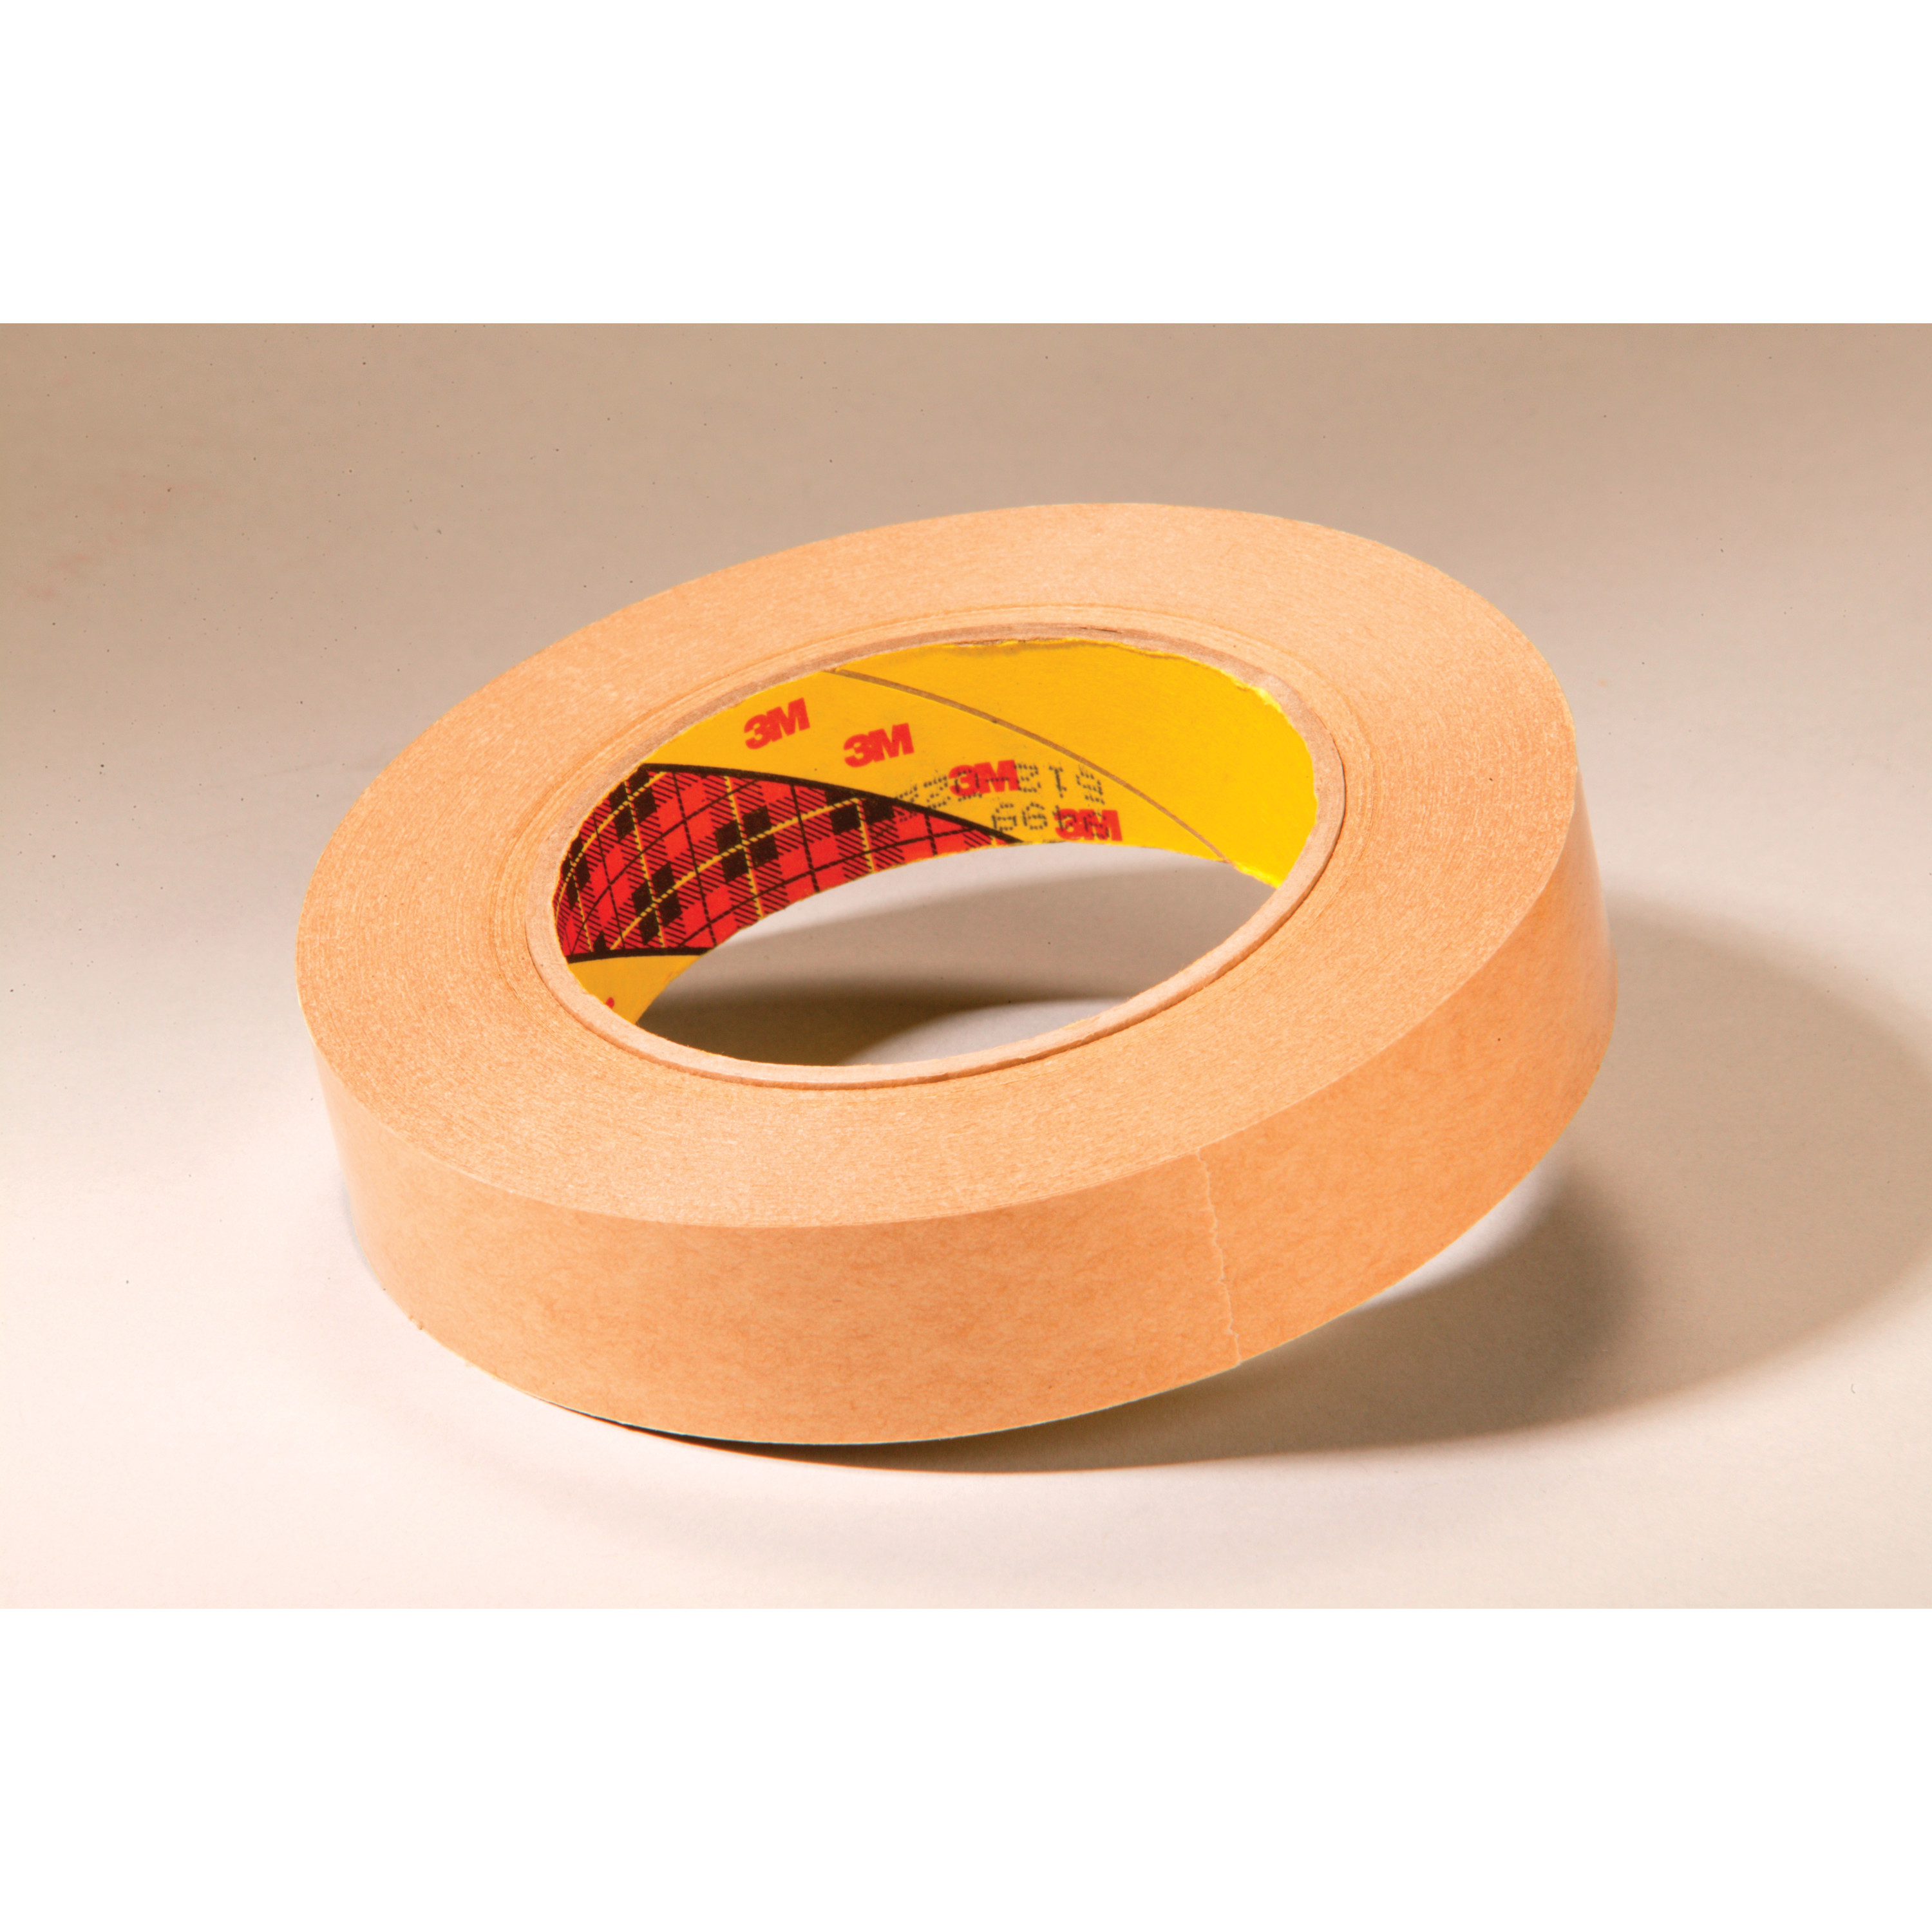 3M™ Adhesive Transfer Tape 9499, Clear, 1 in x 60 yd, 2 mil, 36 rolls
per case